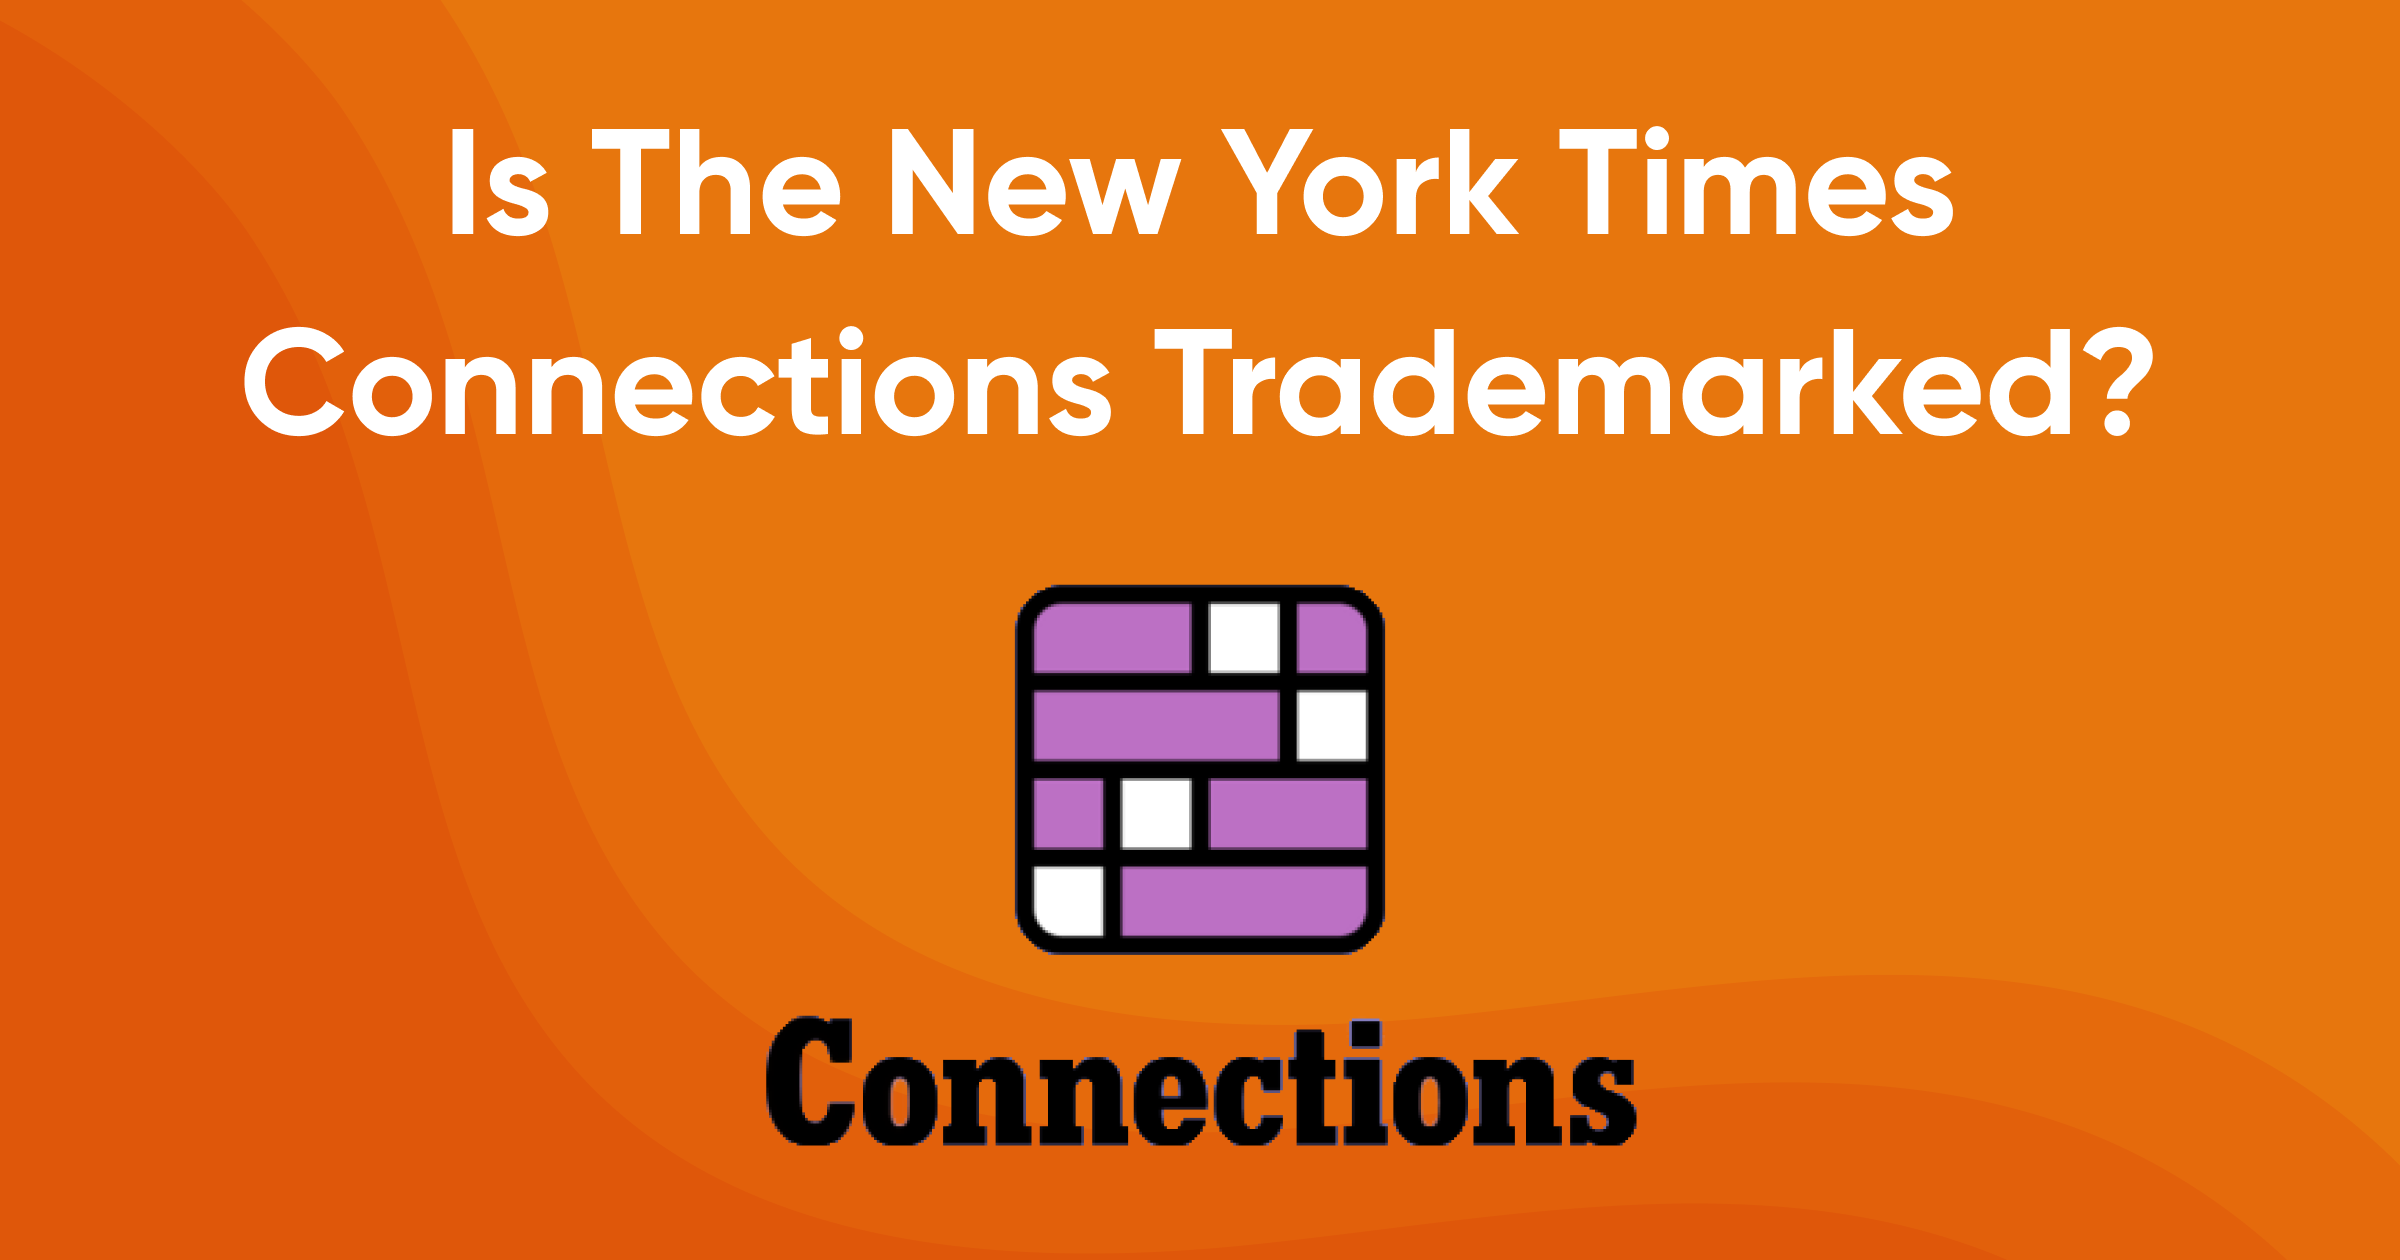 Is The New York Times Connections Trademarked? (The Answer Might Surprise You!)